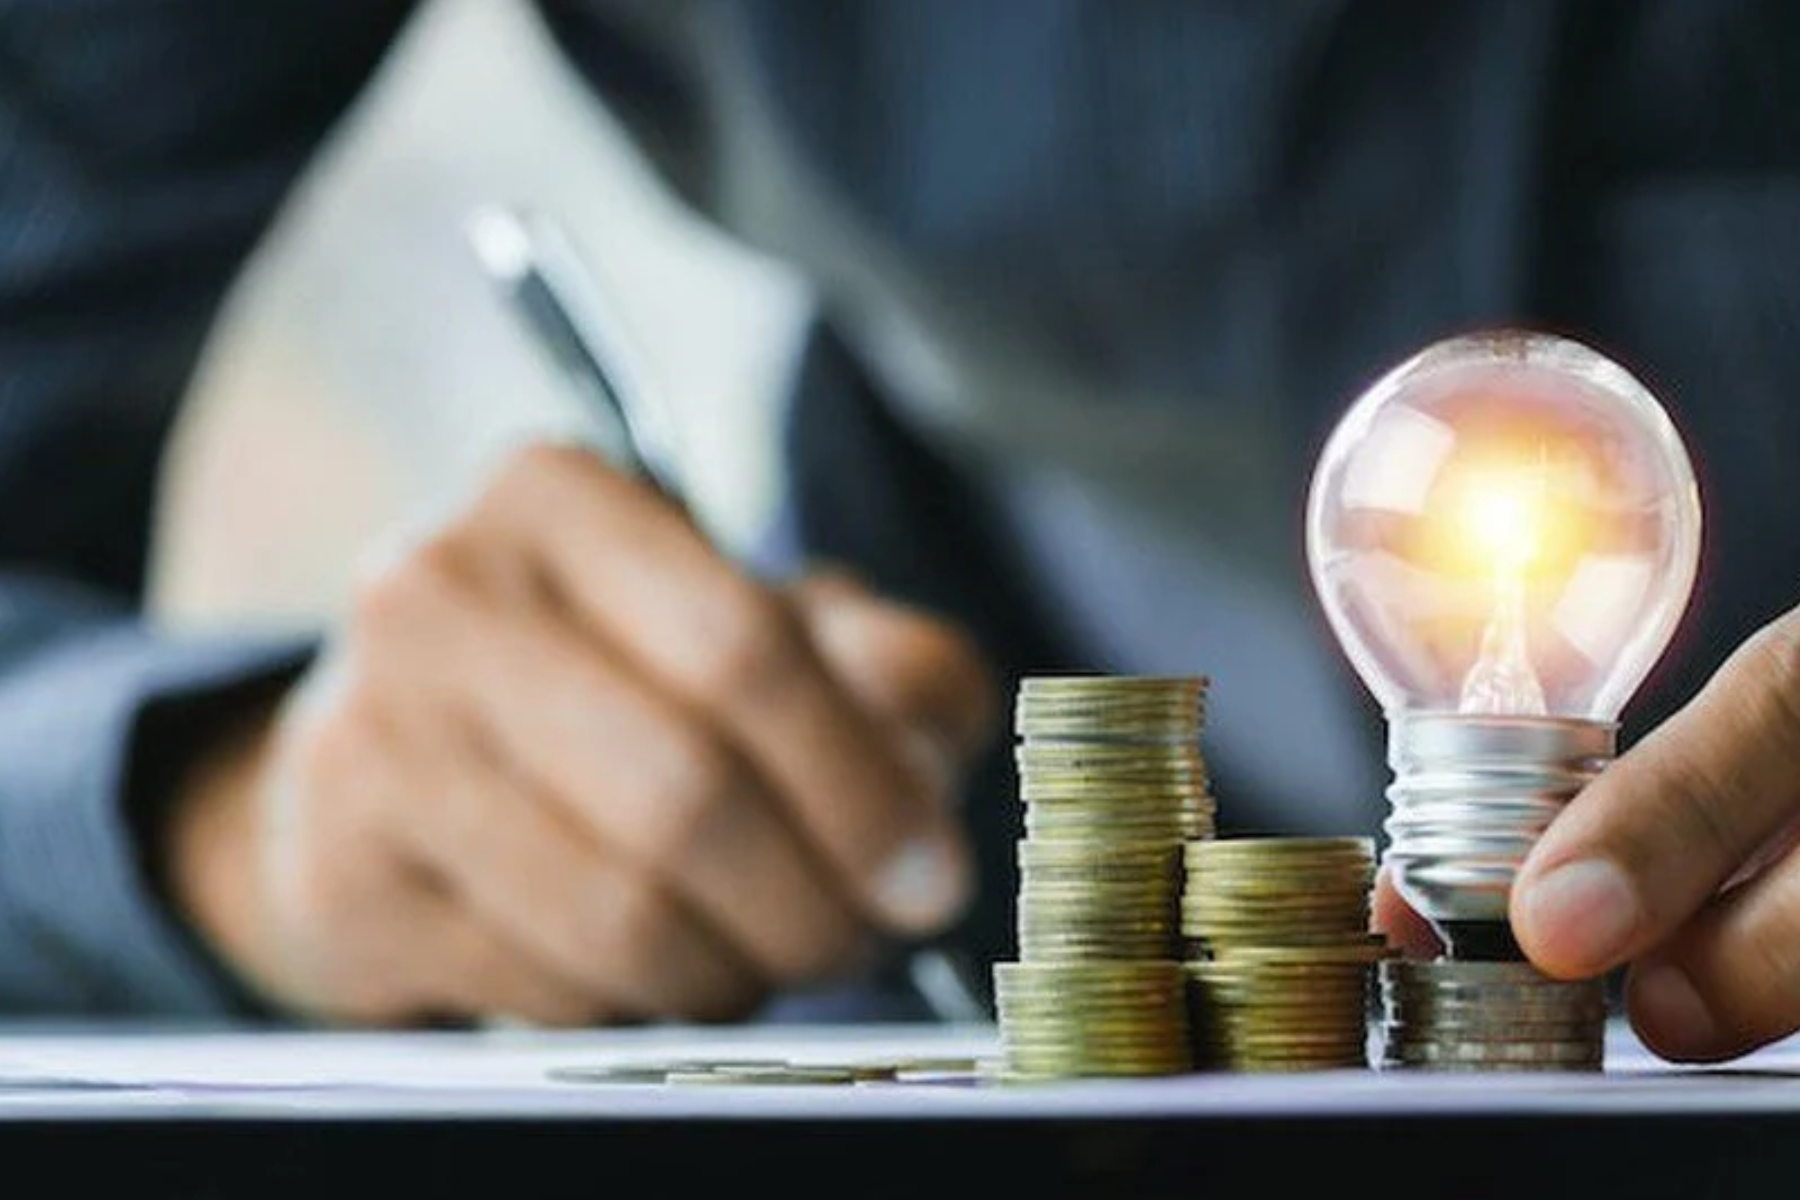 A man writes on a piece of paper while holding a little light bulb and some coins